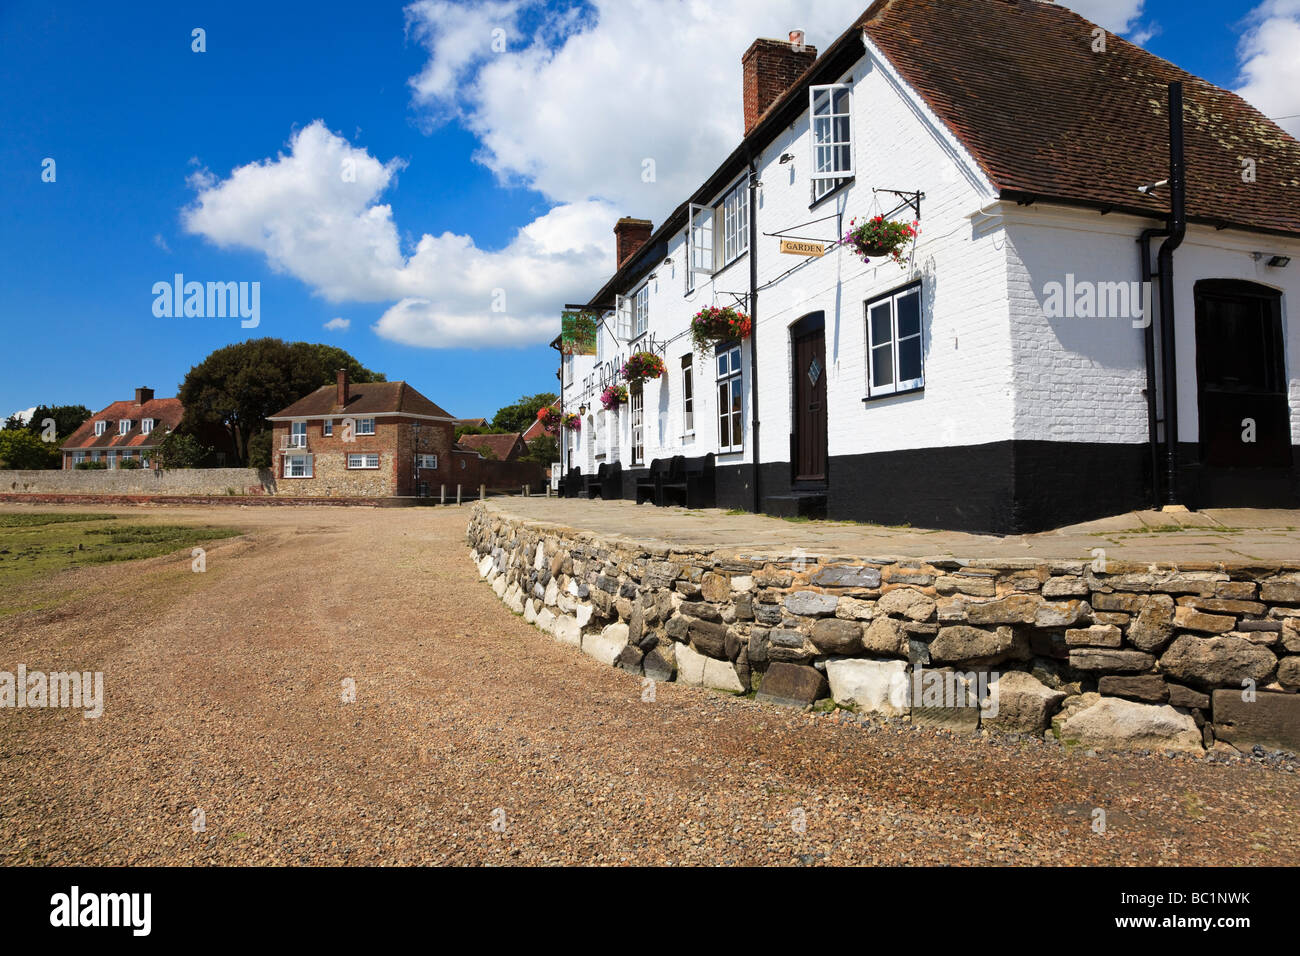 The attractive pub 'The Royal Oak' in the village of Langstone on the edge of Chichester Harbour Stock Photo